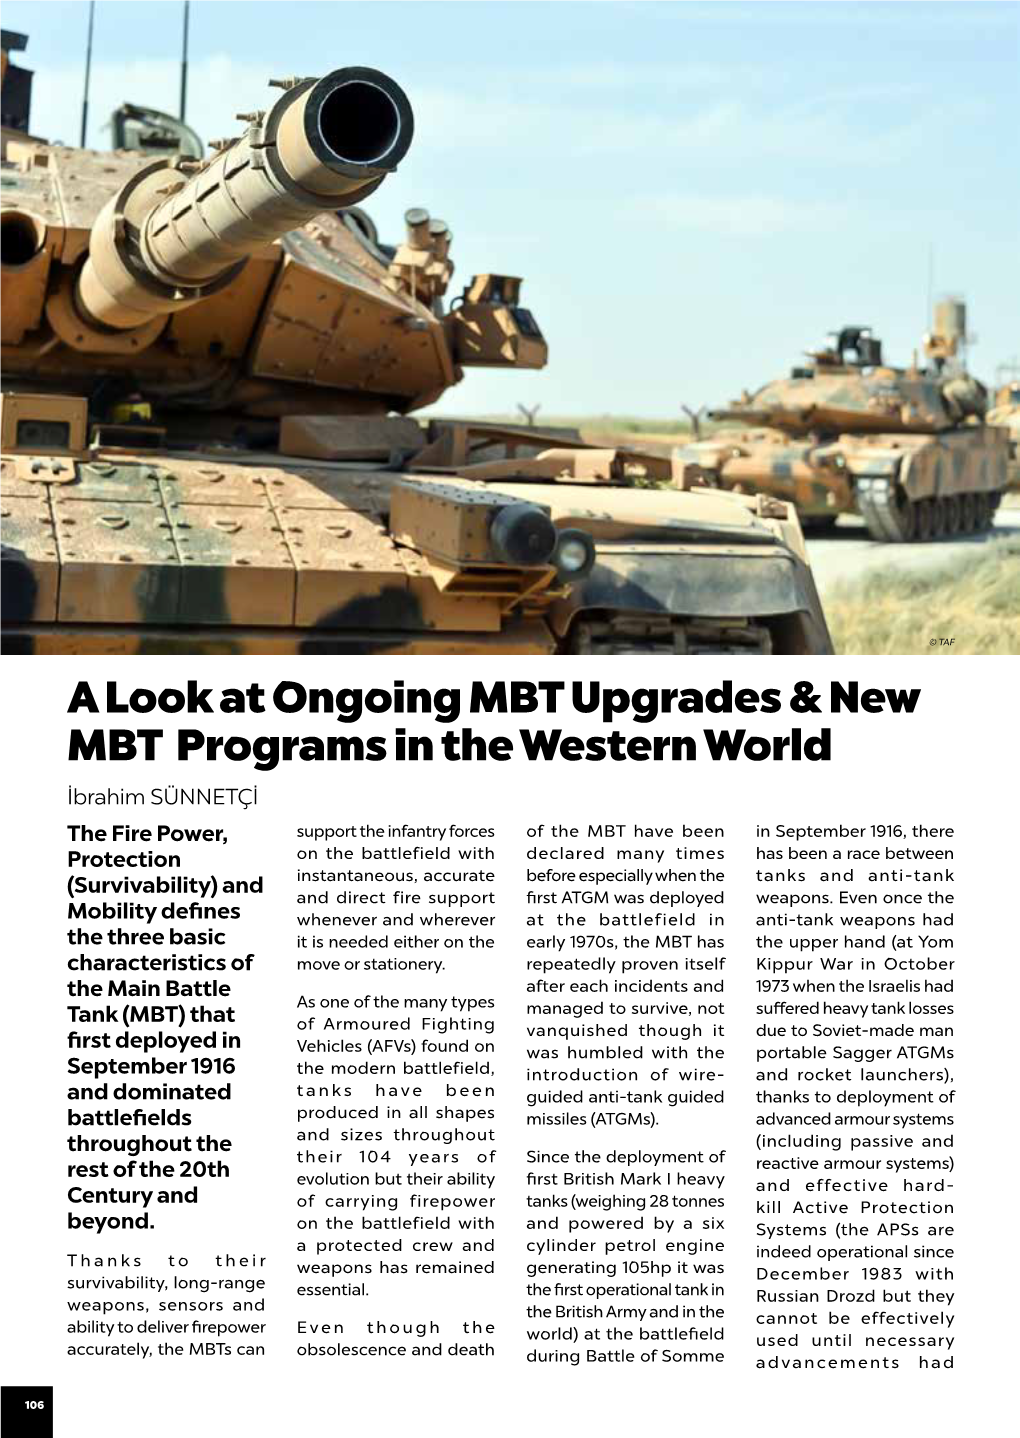 A Look at Ongoing MBT Upgrades & New MBT Programs in the Western